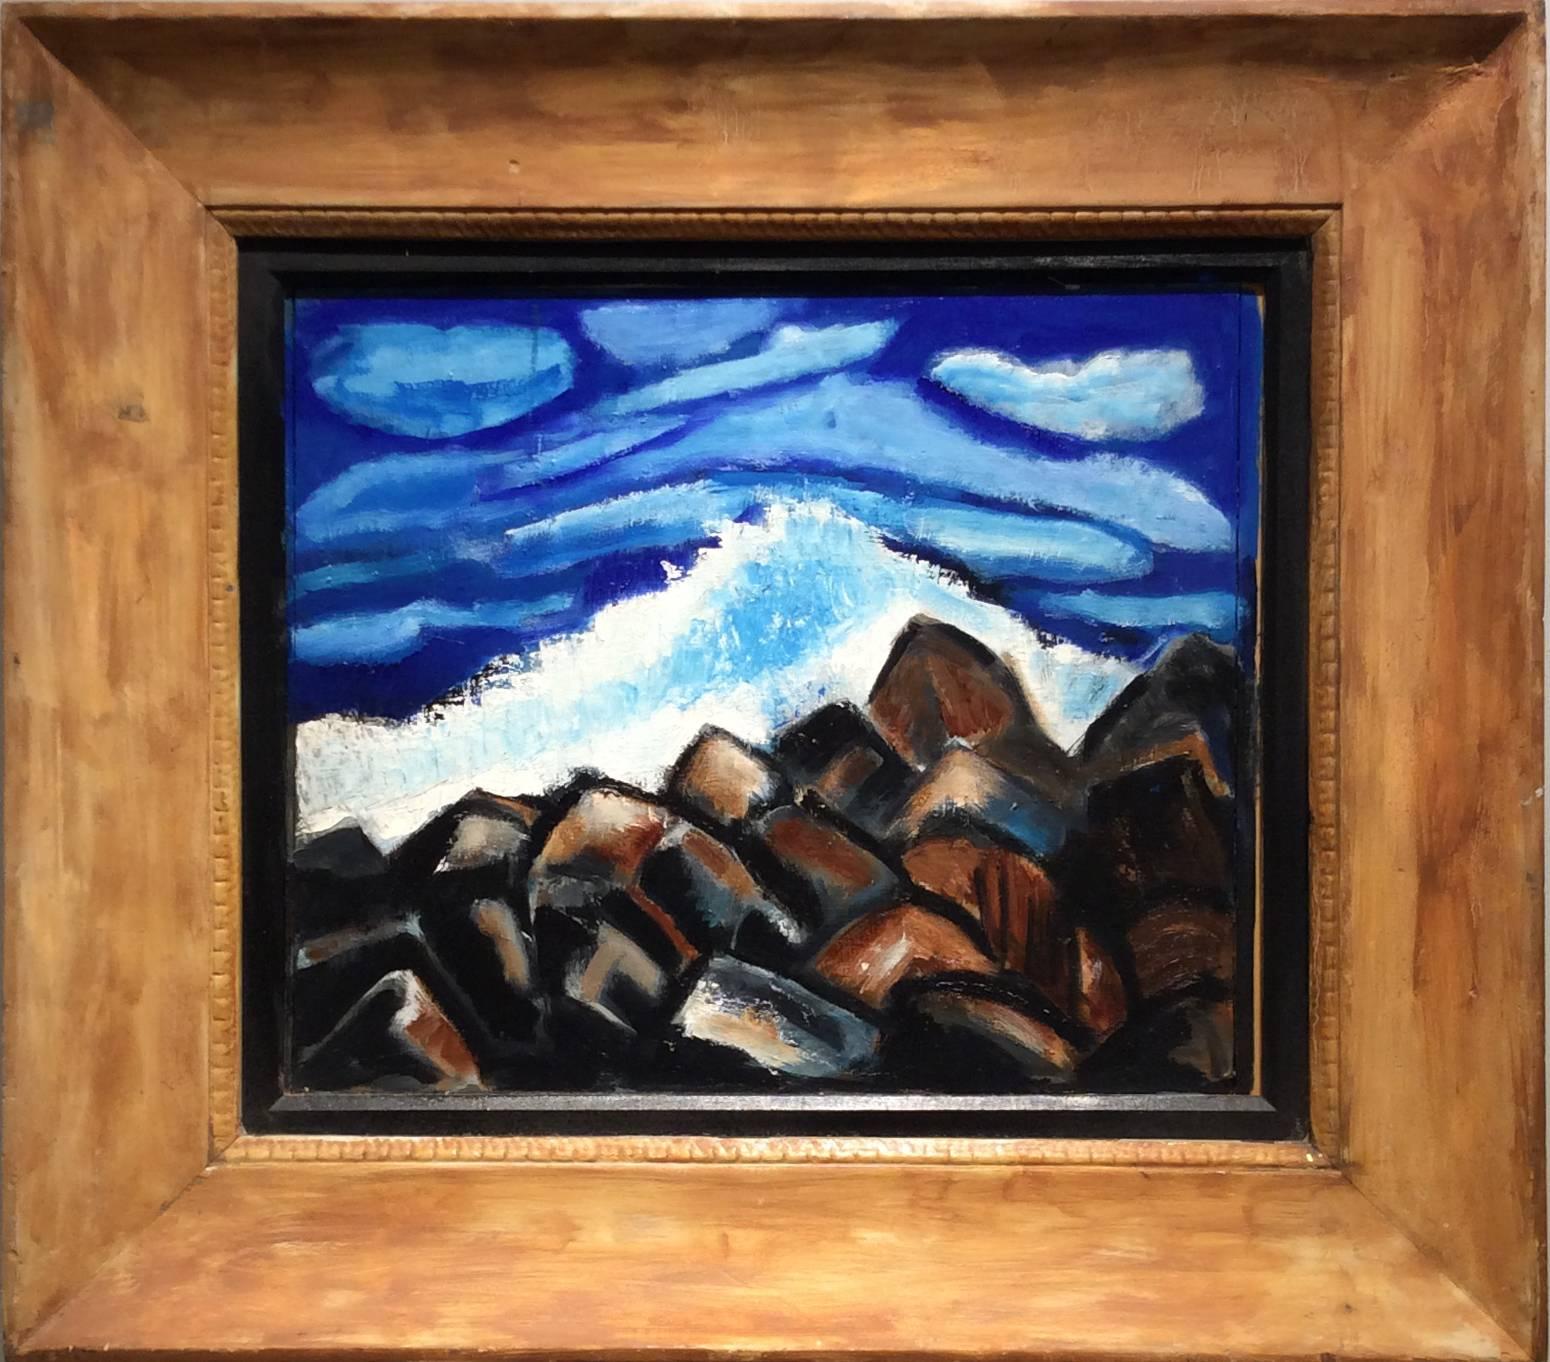 Arthur Hammer Landscape Painting - Rocks, Waves, Clouds (Seascape Painting in Antique Wooden Frame)